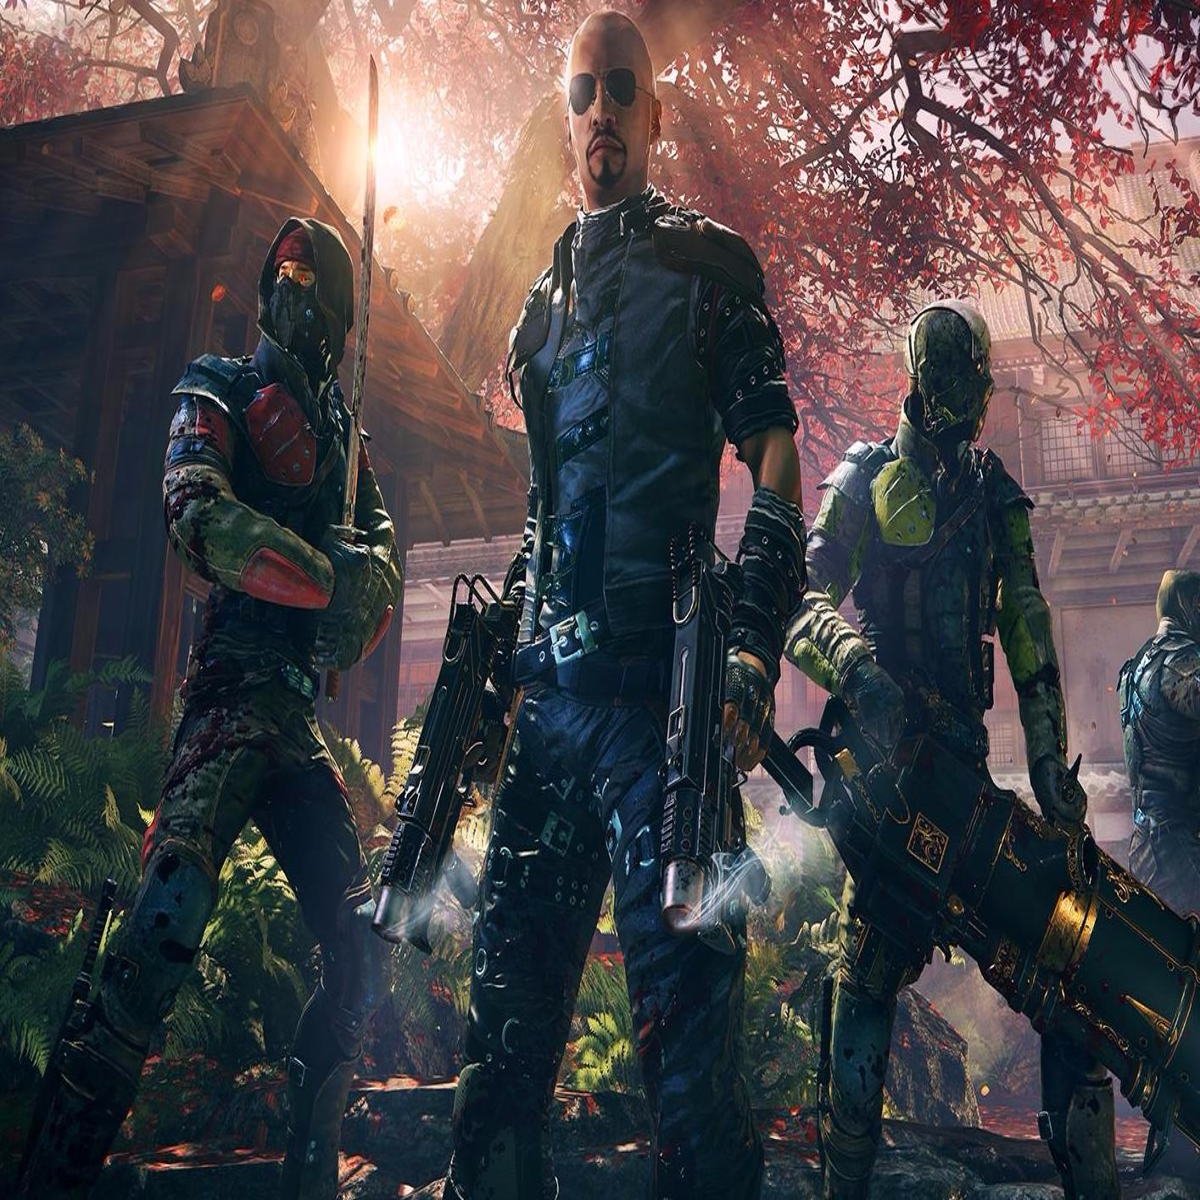 Shadow Warrior 2 is now available on Xbox One and PS4 with a bonus